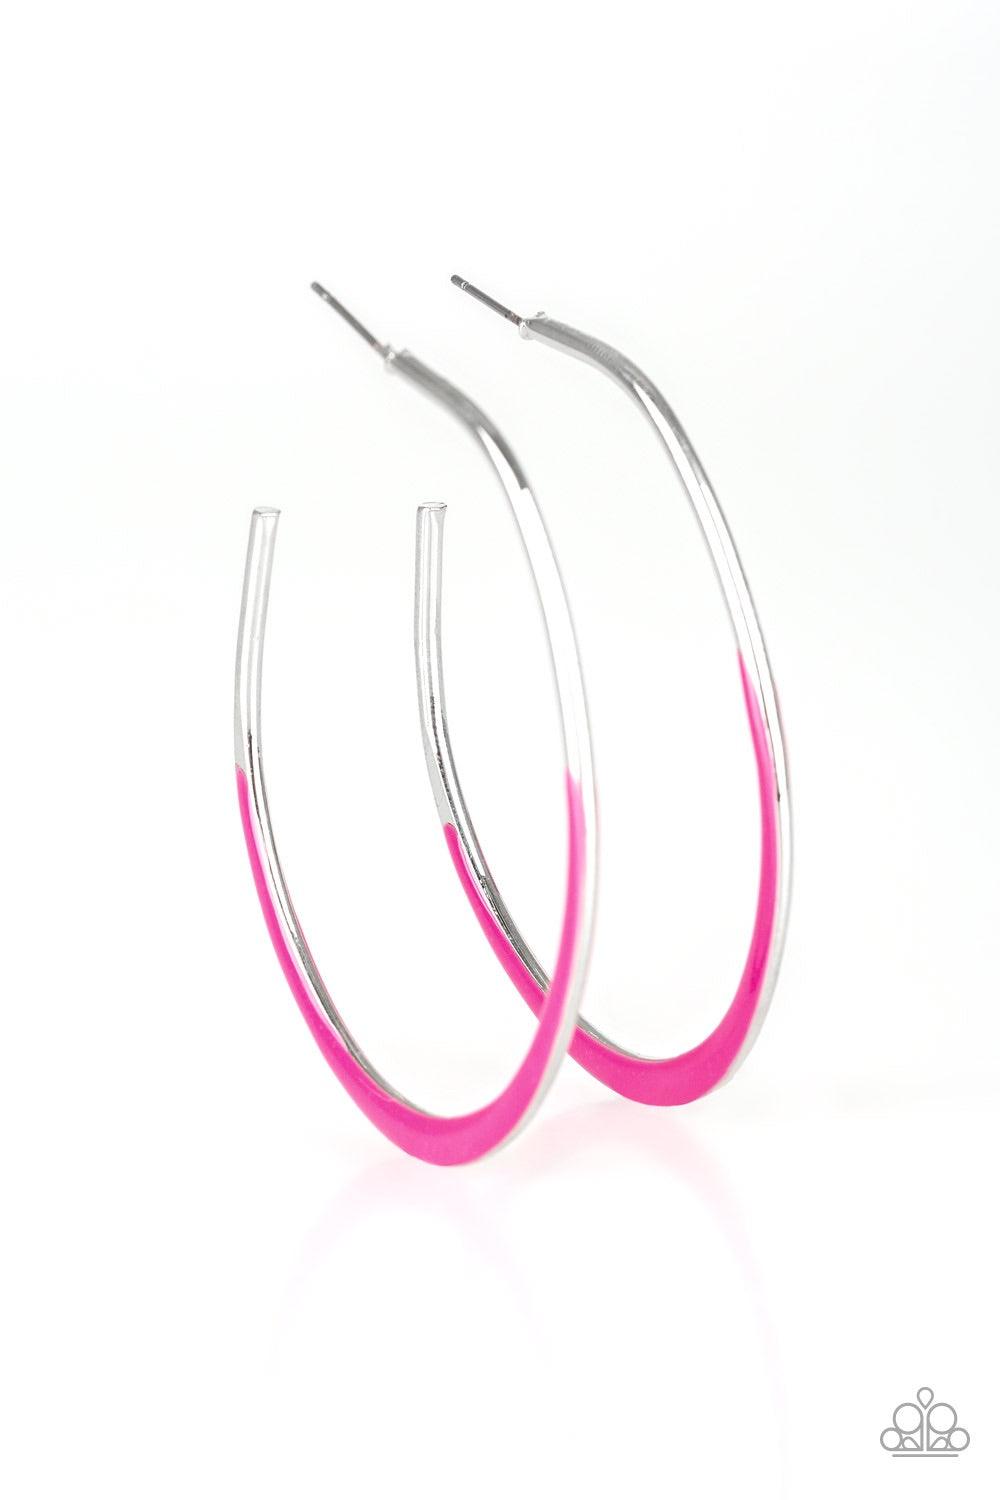 Paparazzi Accessories So Seren-DIP-itous - Pink As if dipped in paint, the bottom of an asymmetrical silver hoop has been glazed in a shiny pink finish for a colorful finish. Earring attaches to a standard post fitting. Hoop measures 1 3/4" in diameter. J